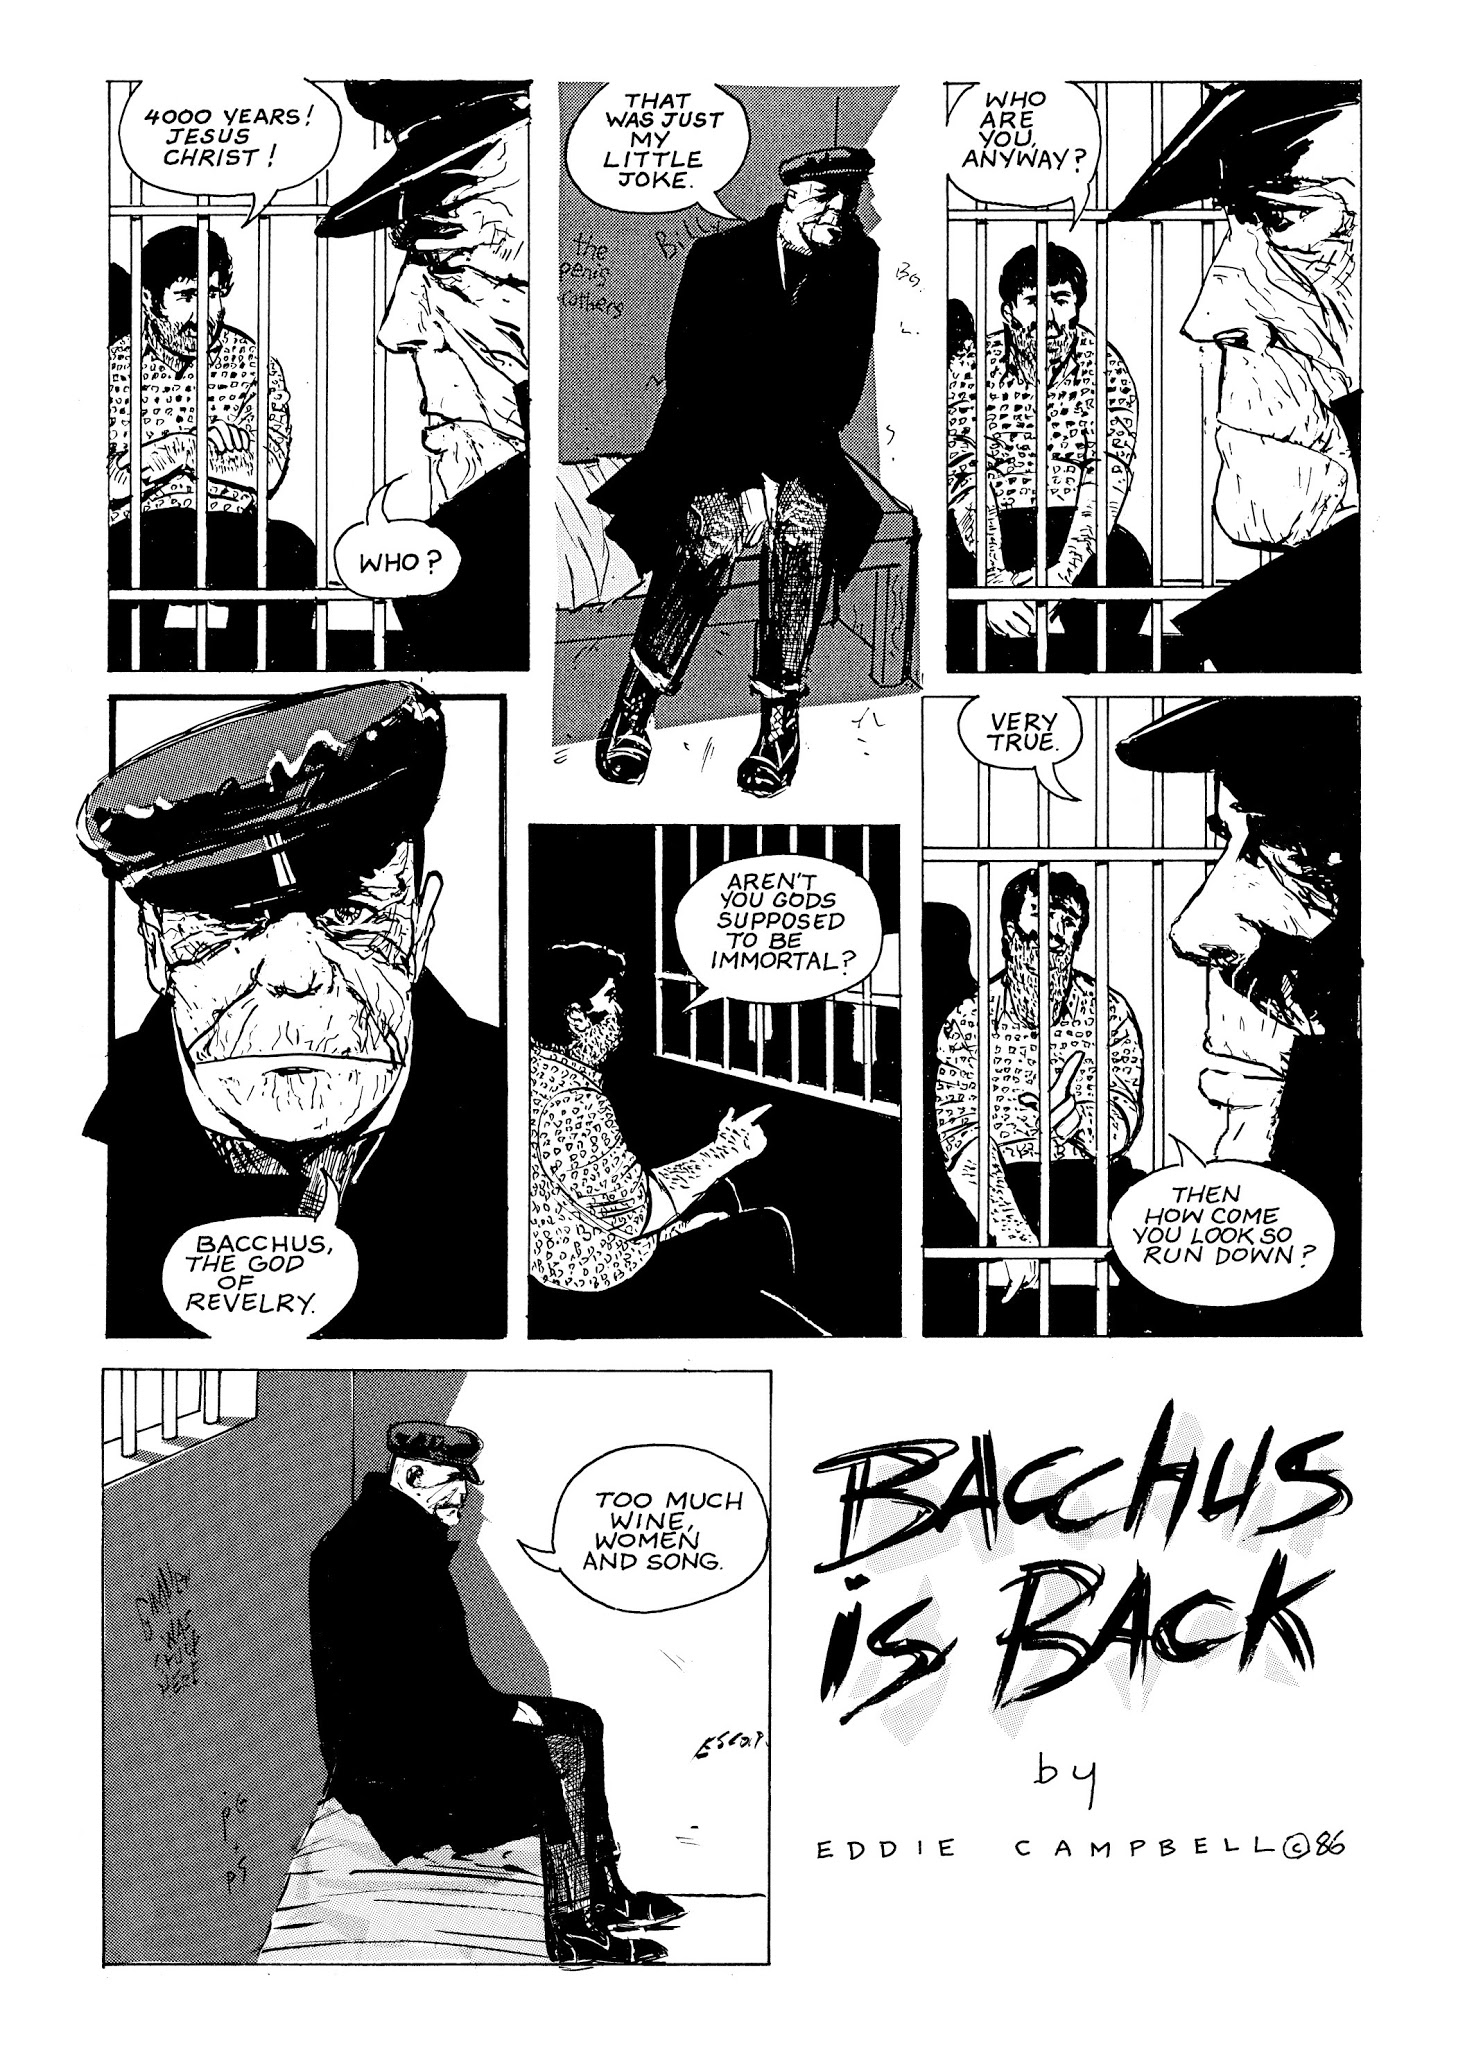 Read online Eddie Campbell's Bacchus comic -  Issue # TPB 1 - 4